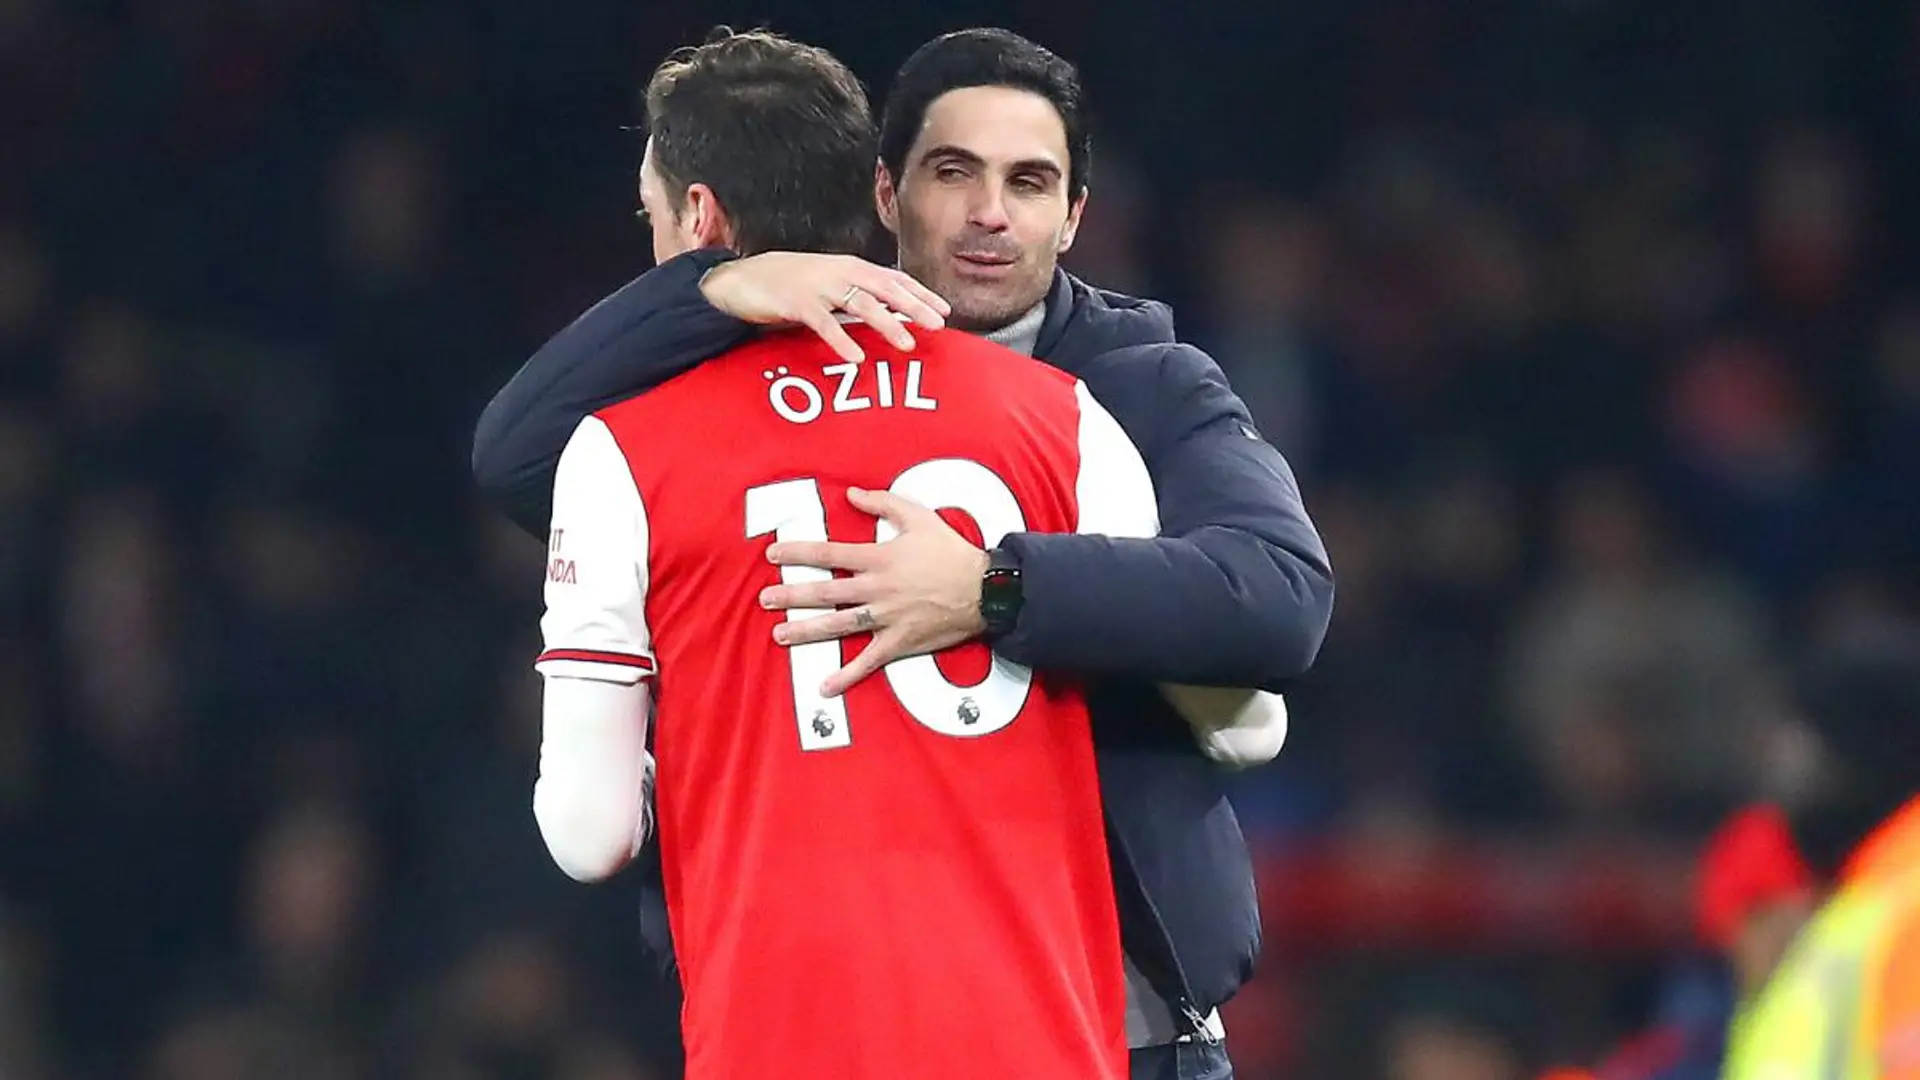 ARTETA NEEDS OZIL BUT THE ADMINISTRATION IS BENT ON MAKING THE GERMAIN LEAVE. 